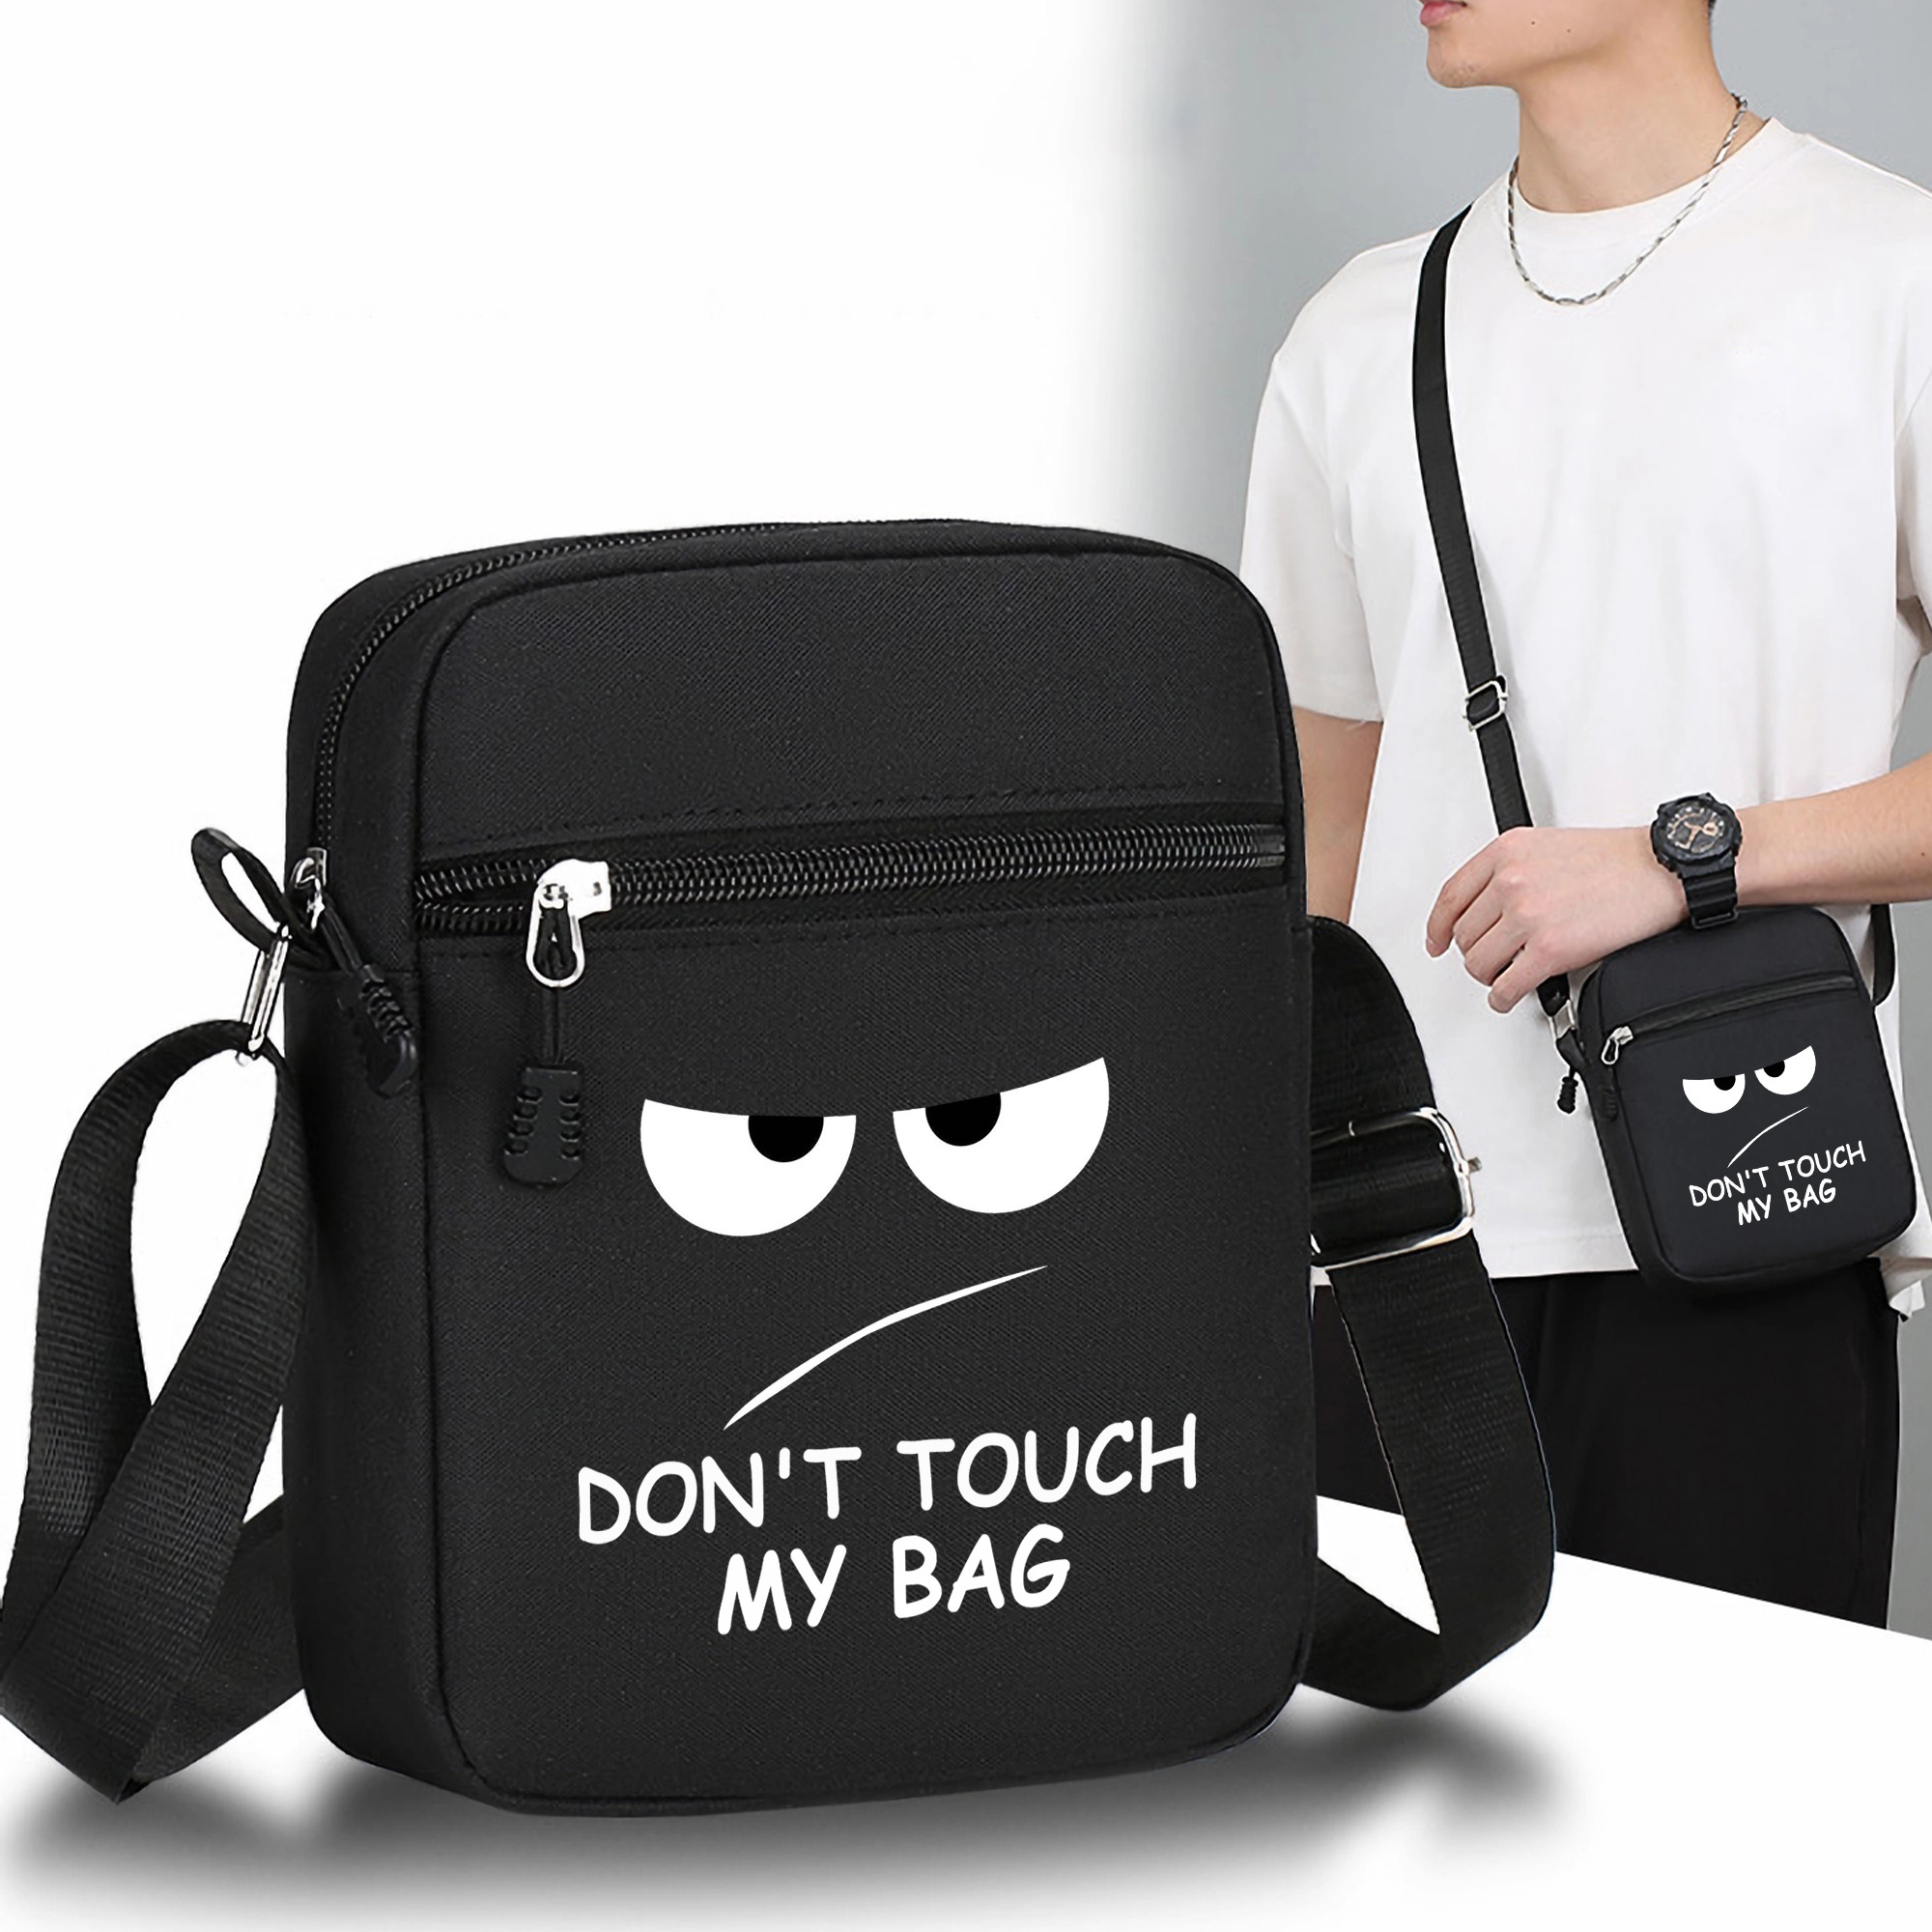 

Don't Touch My Bag Pattern Oxford Cloth Crossbody Bag, Fashionable Print Shoulder Bag, With Adjustable Strap Crossbody Bag, Casual Sports Travel Bag